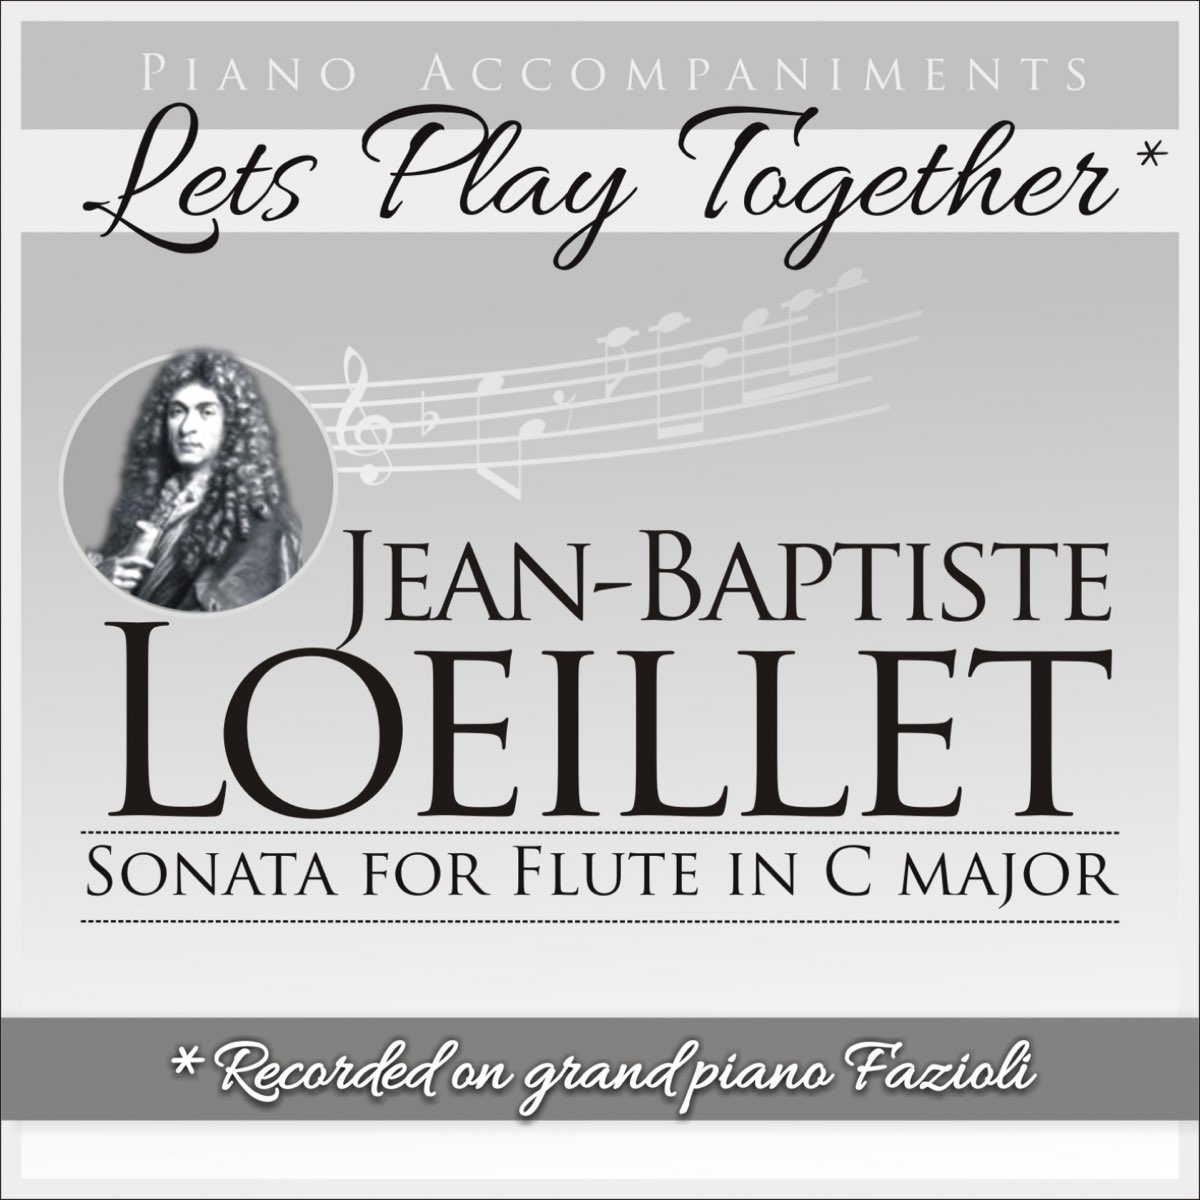 Jean-Baptiste Loeillet de Gant: Flute Sonata in C Major (Piano  Accompaniment, Let's Play Together) - EP by Piotr Bialas on Apple Music